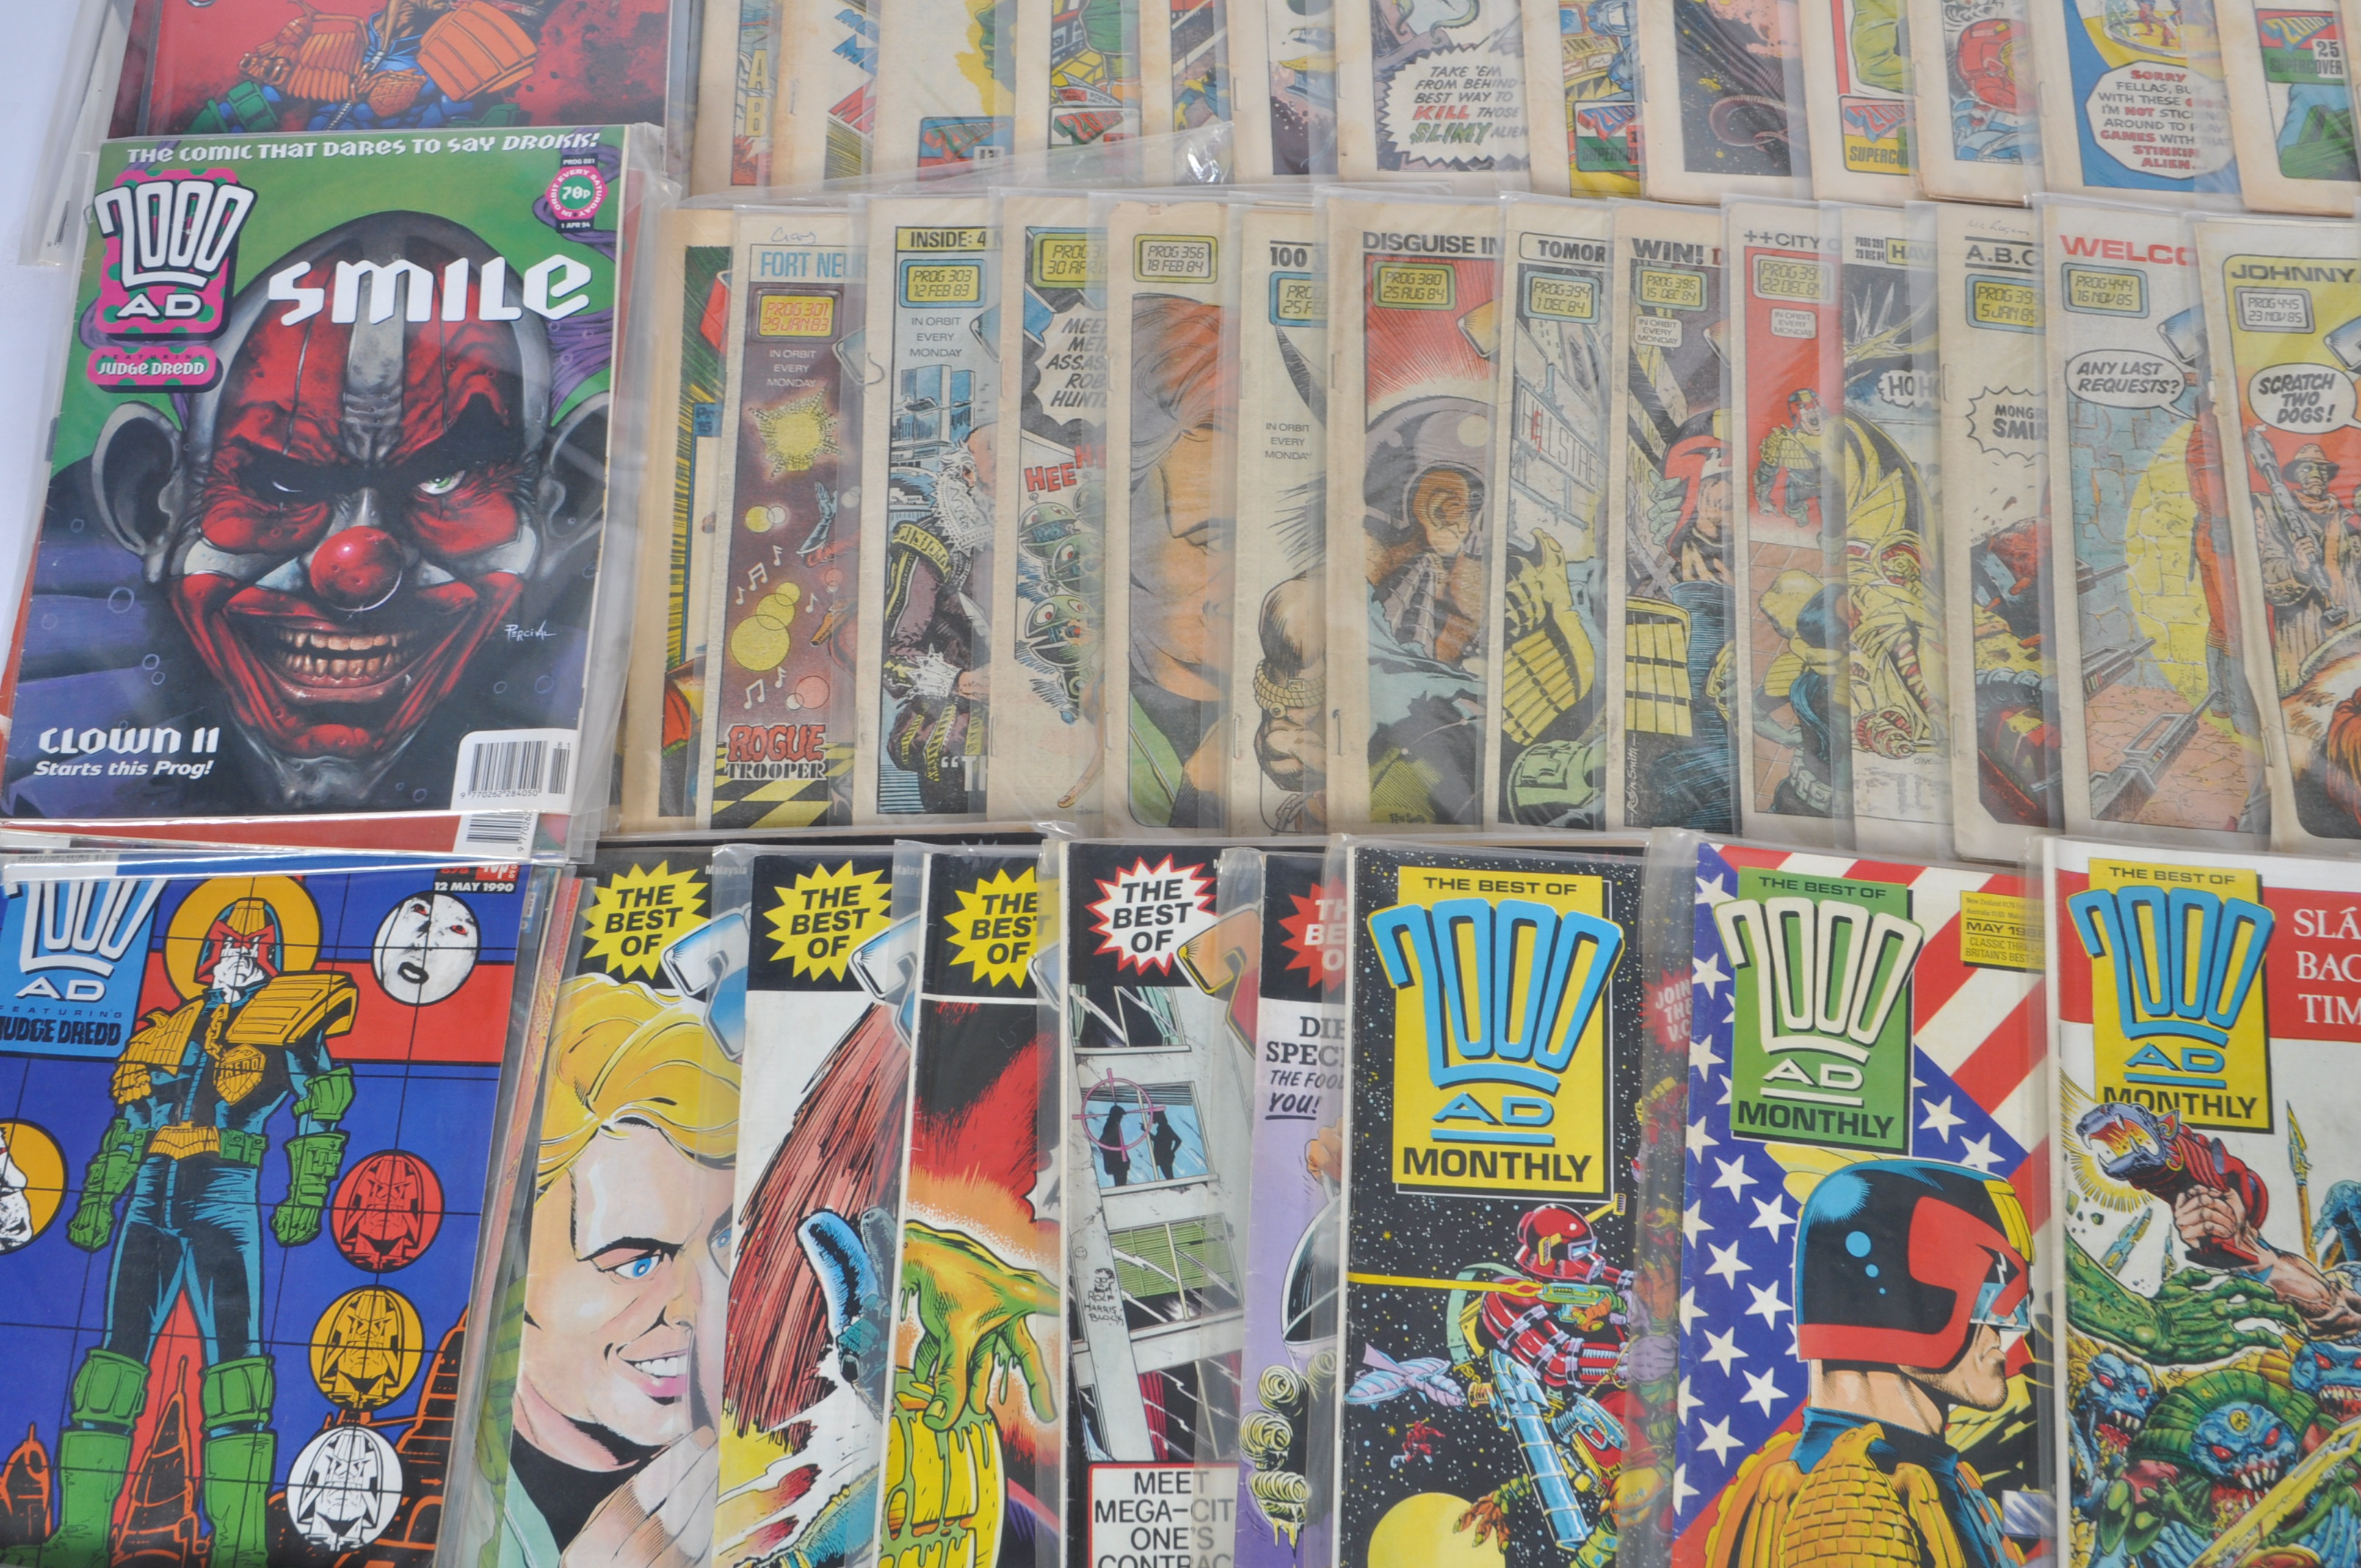 COMIC BOOKS - 2000AD - LARGE COLLECTION OF VINTAGE COMIC BOOKS - Image 13 of 17